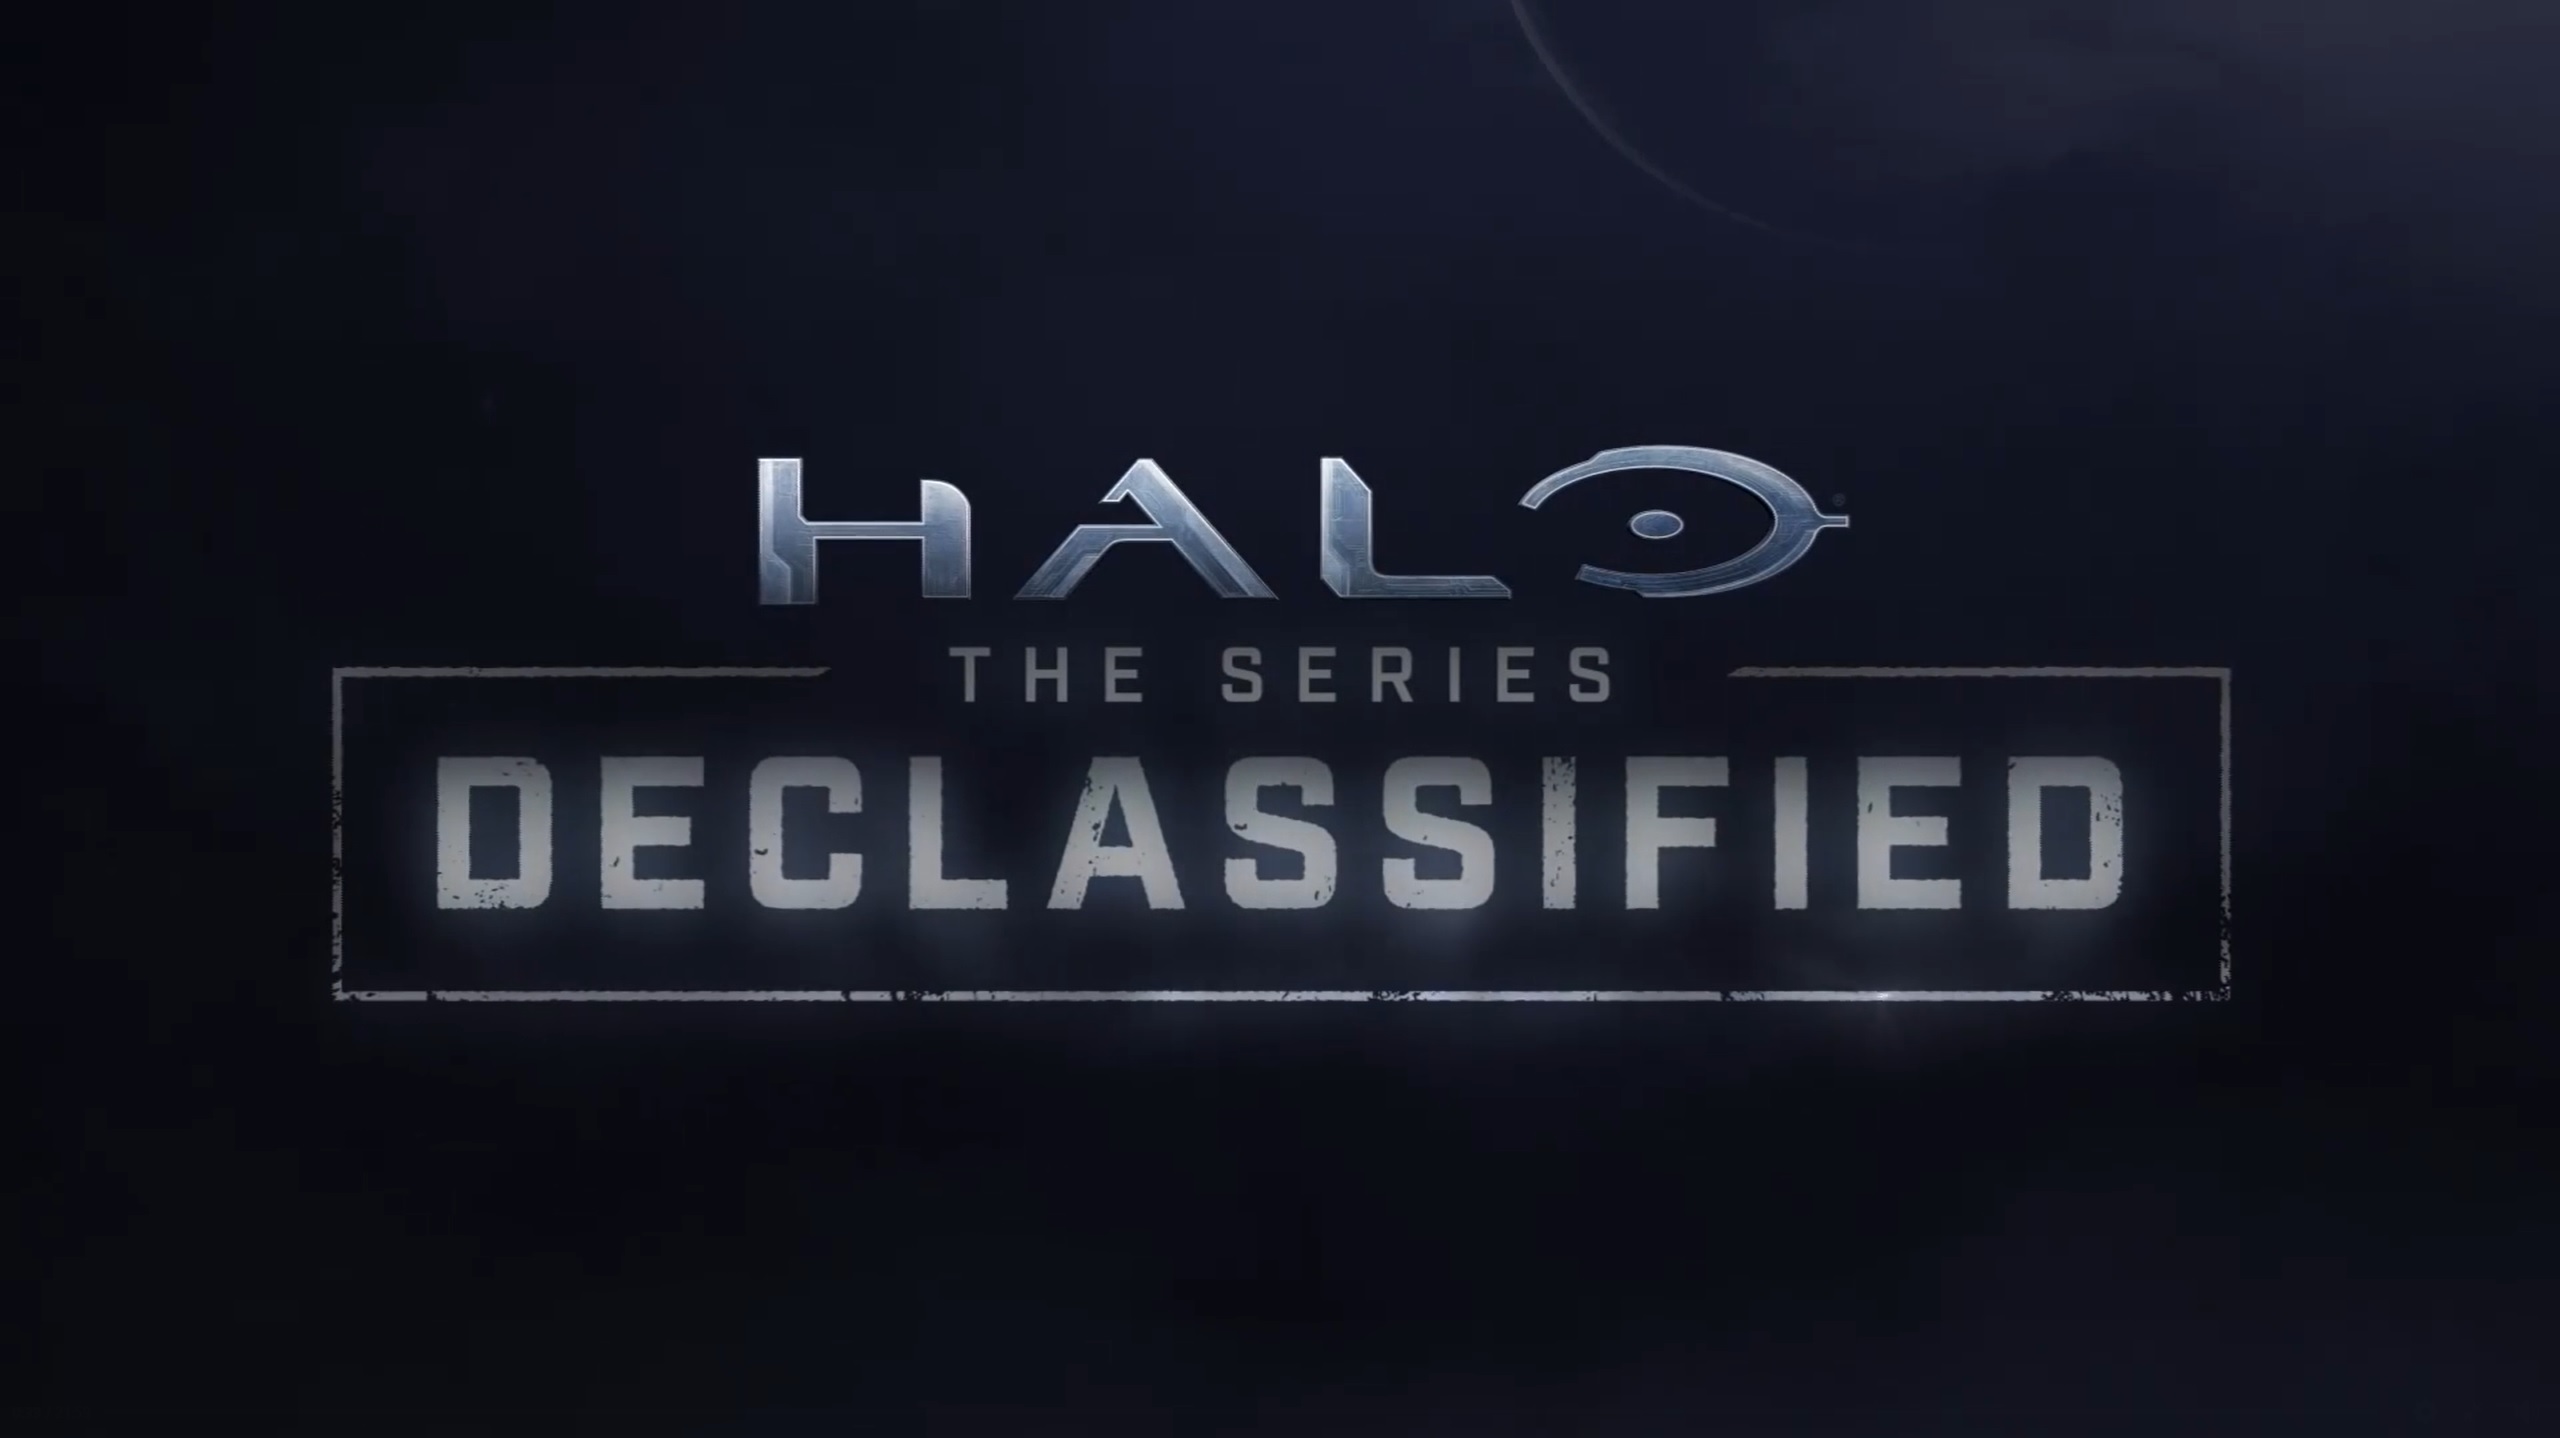 Header image for Halo The Series Declassified